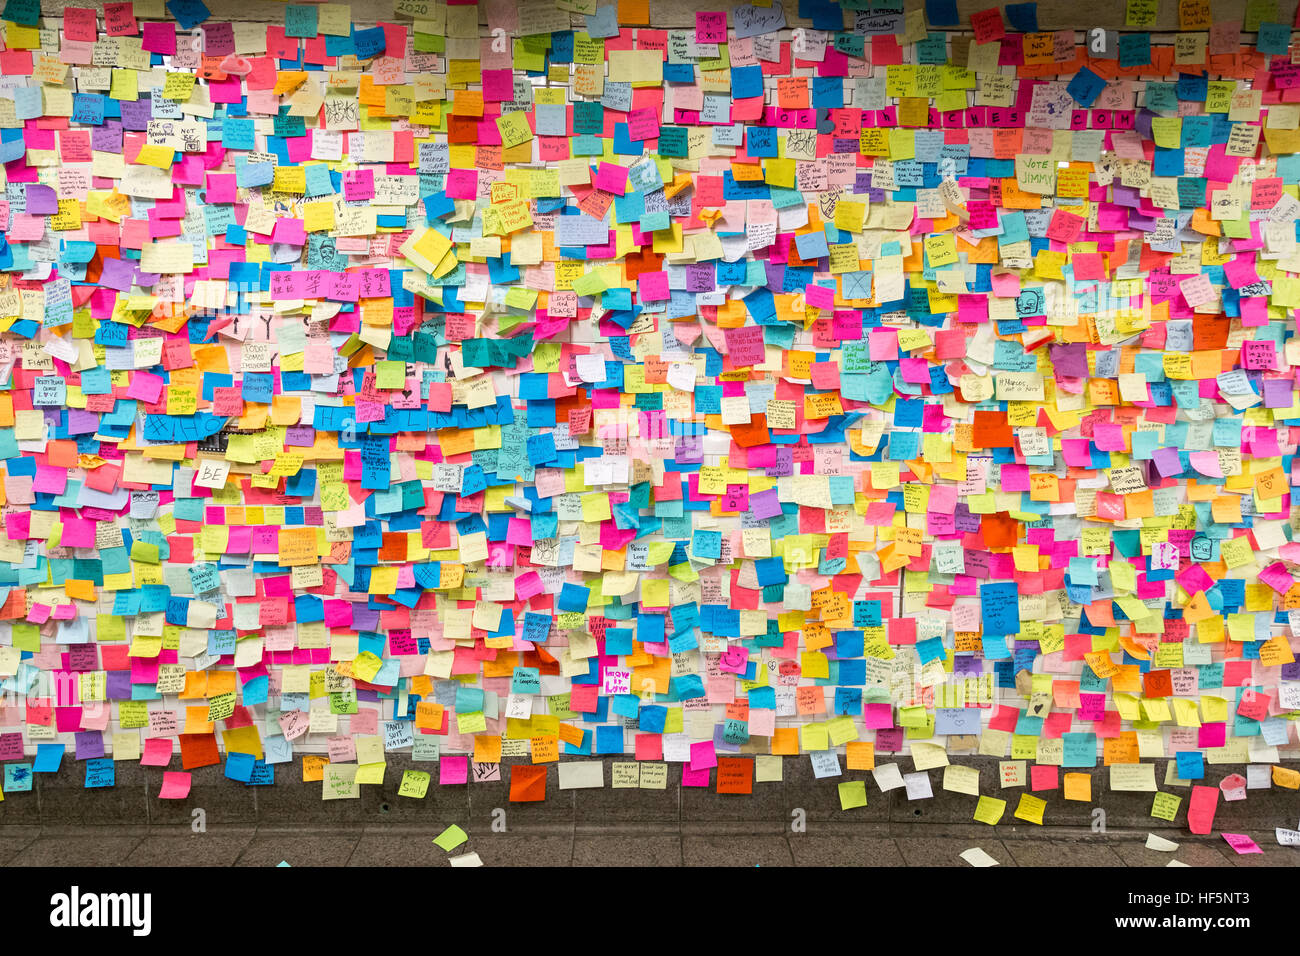 New York, United States of America - November 21, 2016: Sticky post-it notes on wall in Union Square subway station Stock Photo